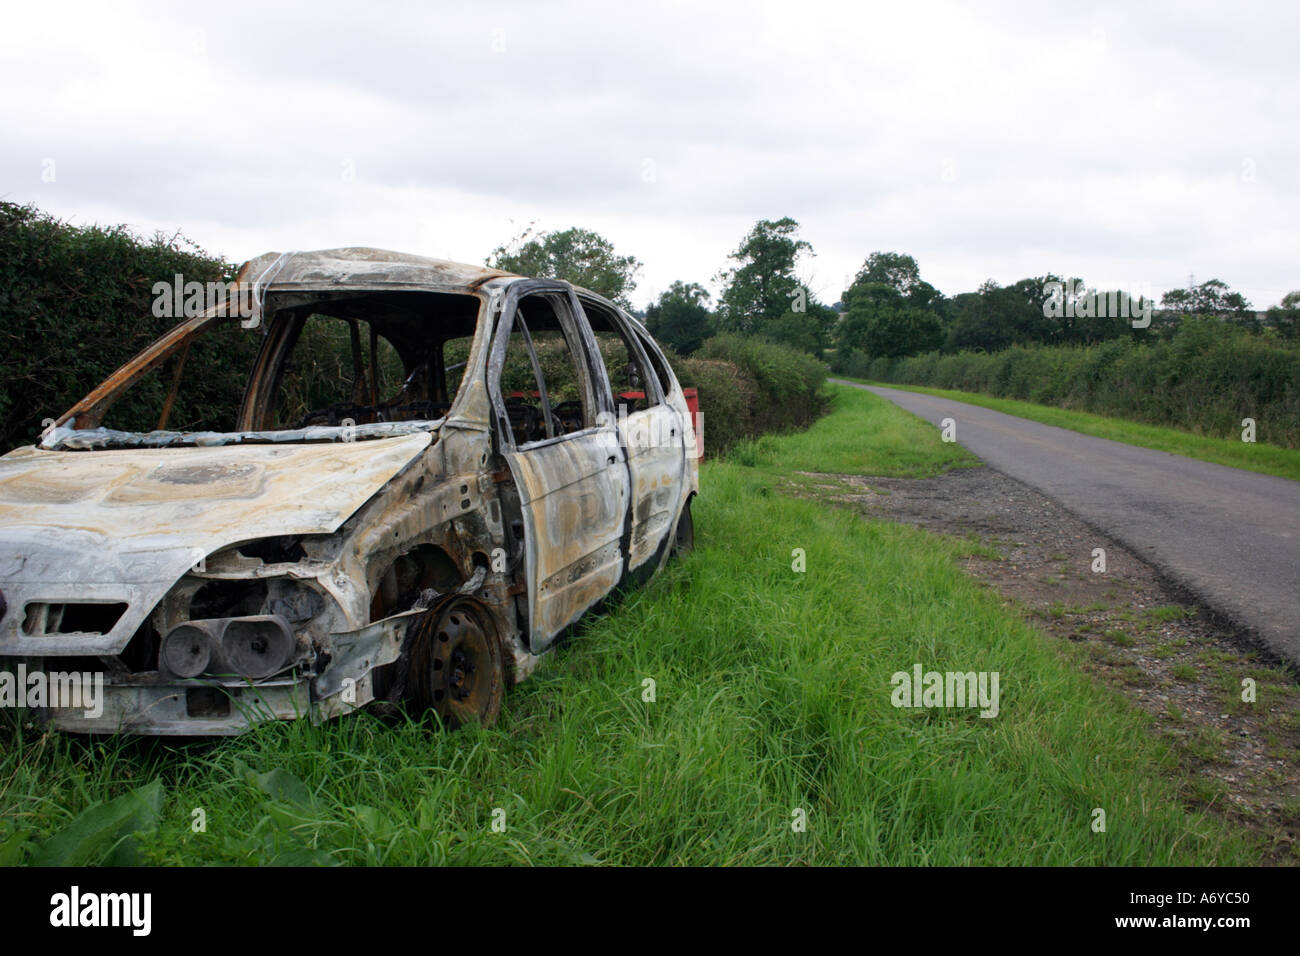 Burnt out car in countryside Stock Photo